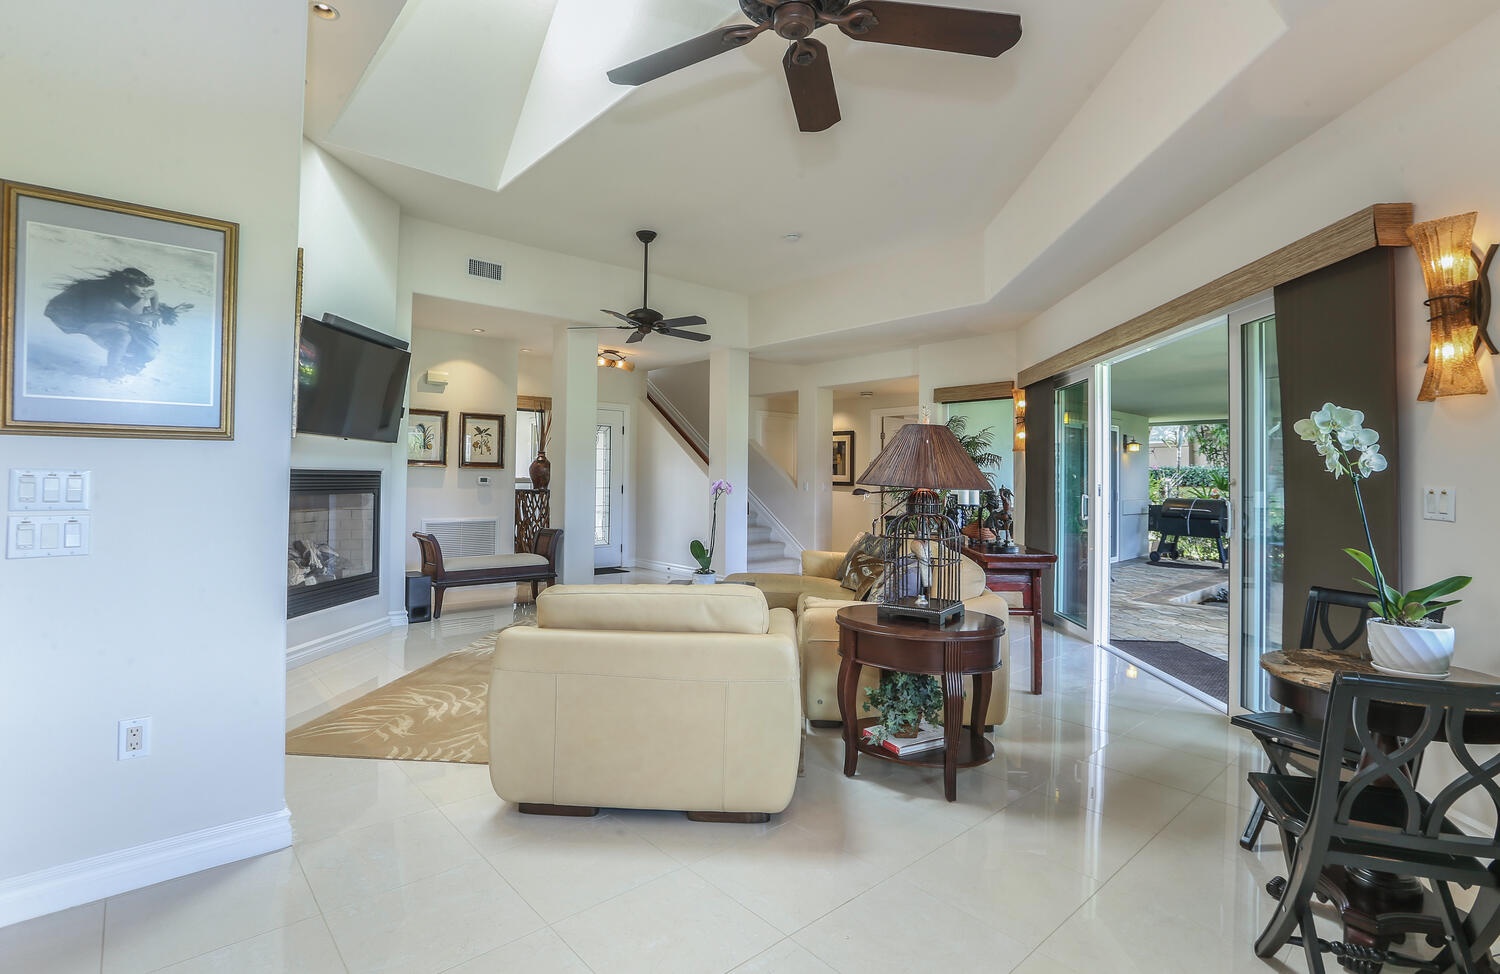 Princeville Vacation Rentals, Hale Moana - The formal living room